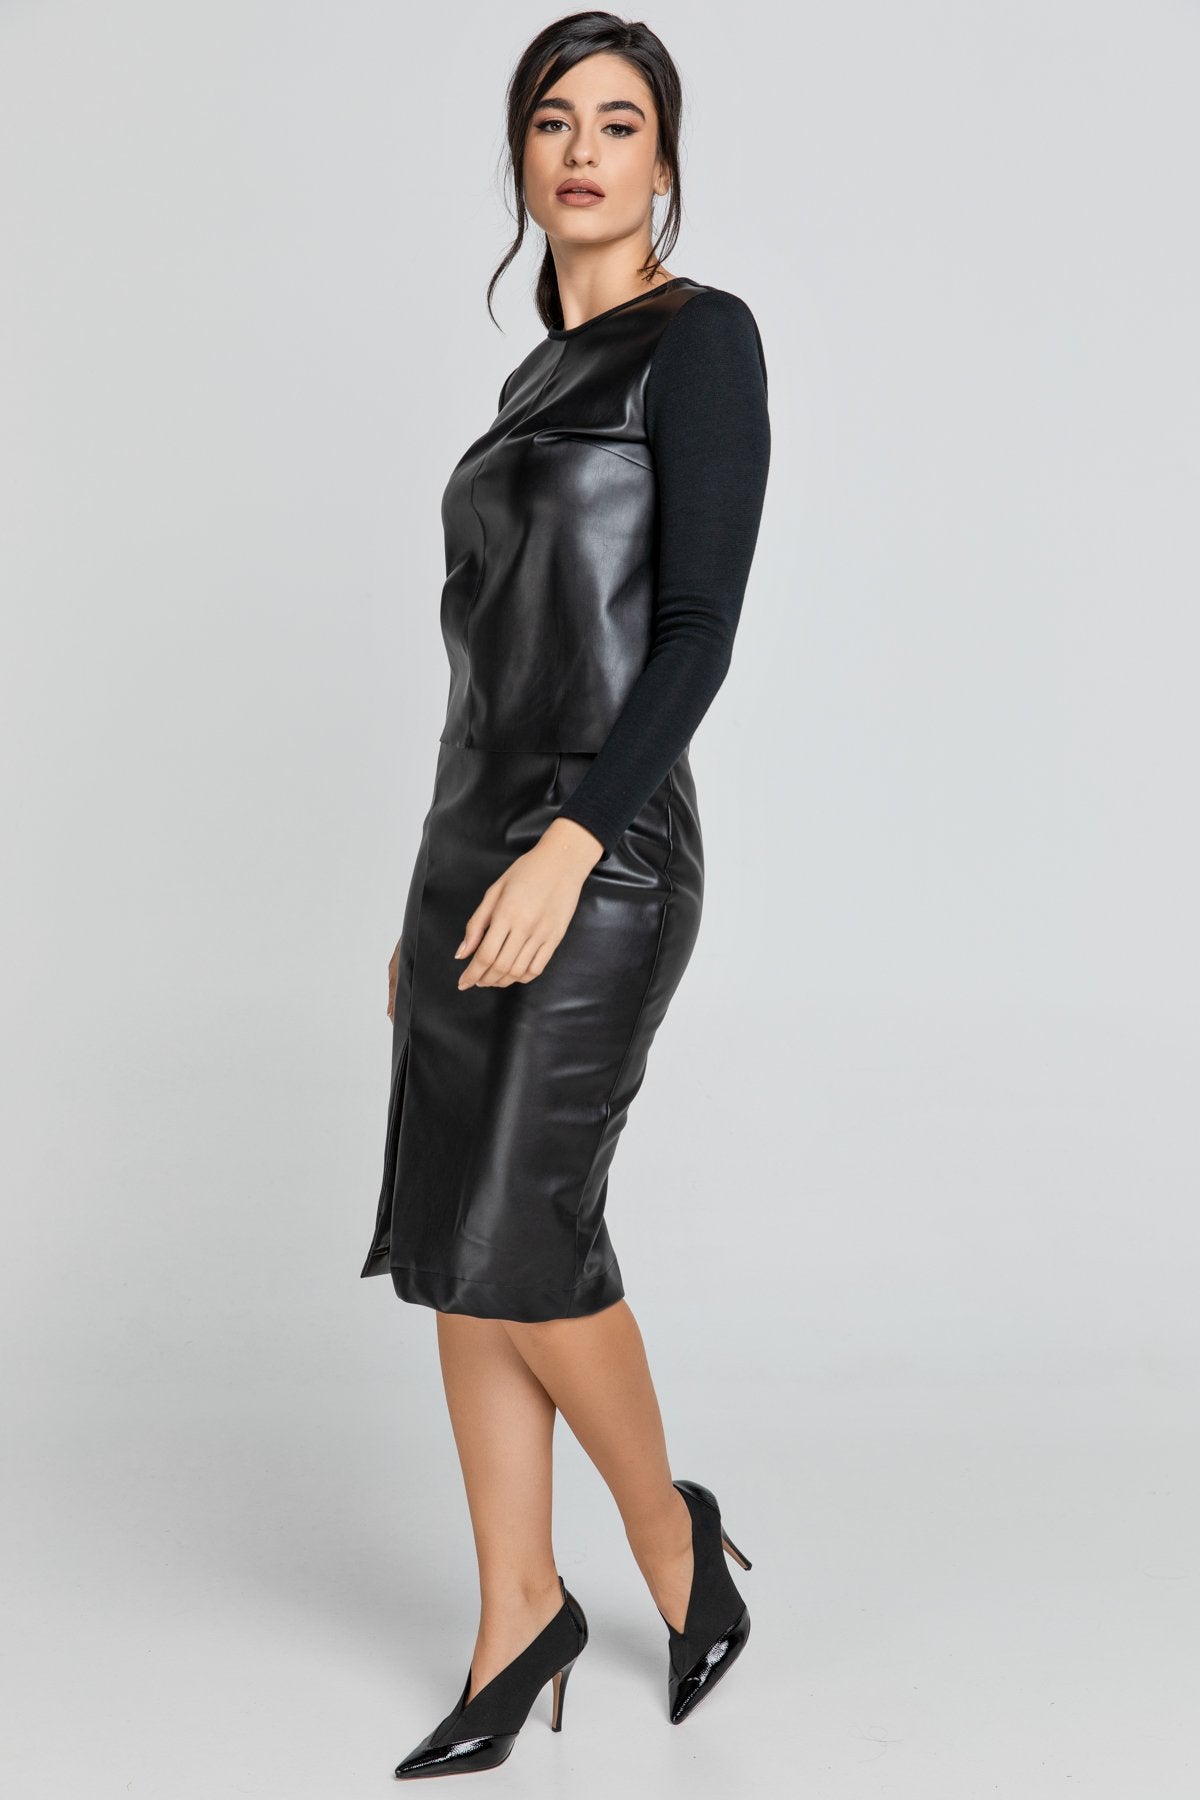 Black Top With Faux Leather Front - LOLA LUXE